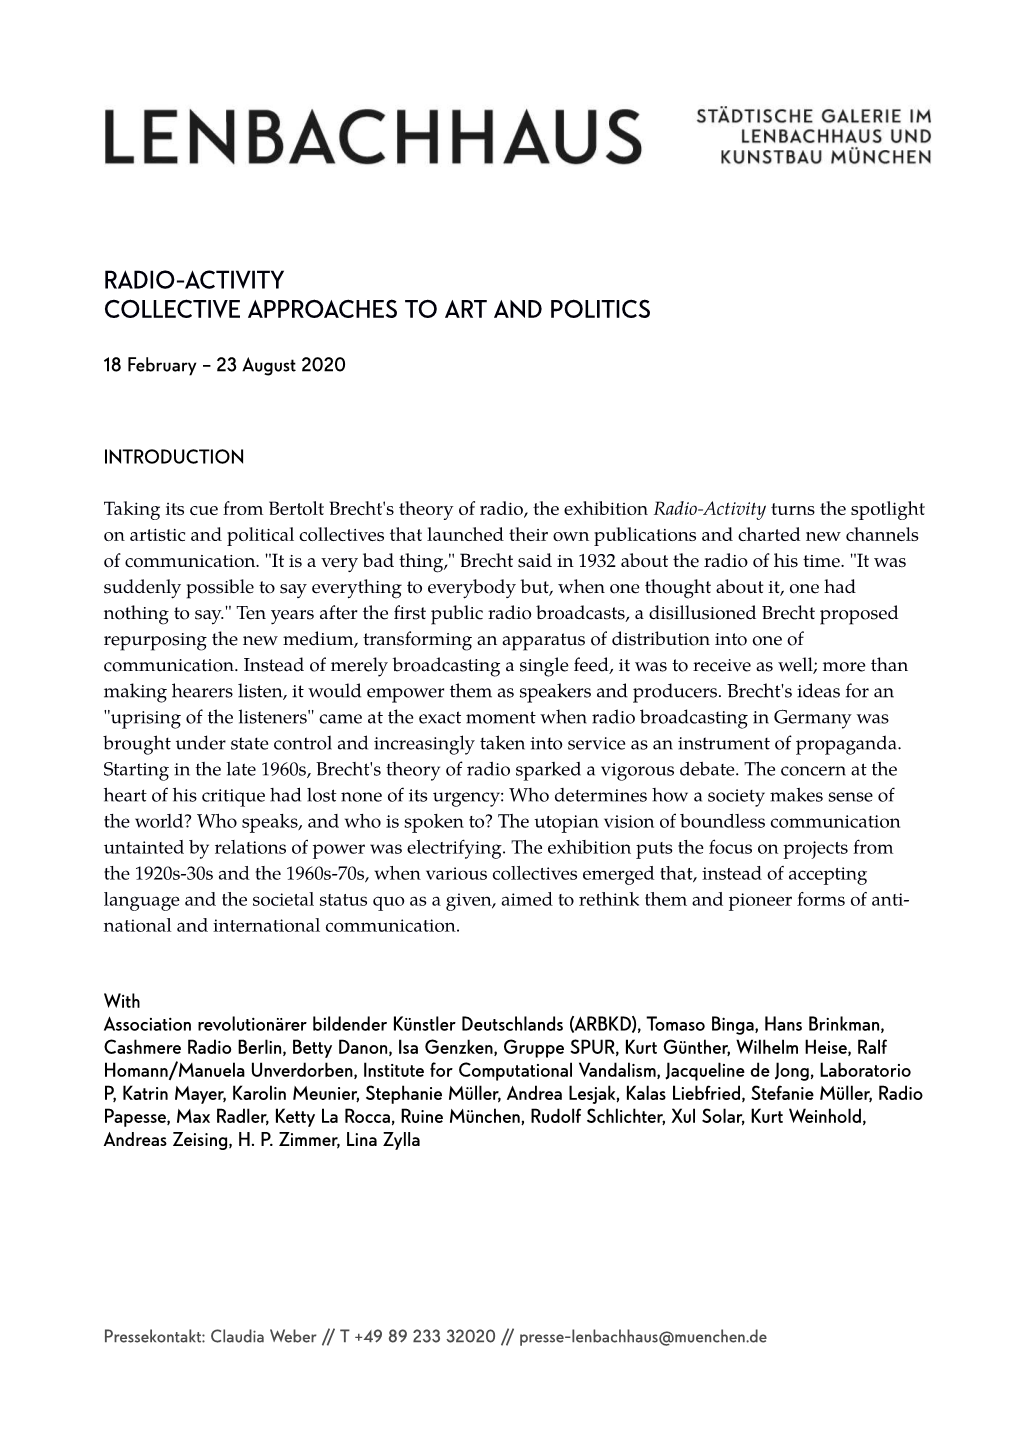 Radio-Activity Collective Approaches to Art and Politics